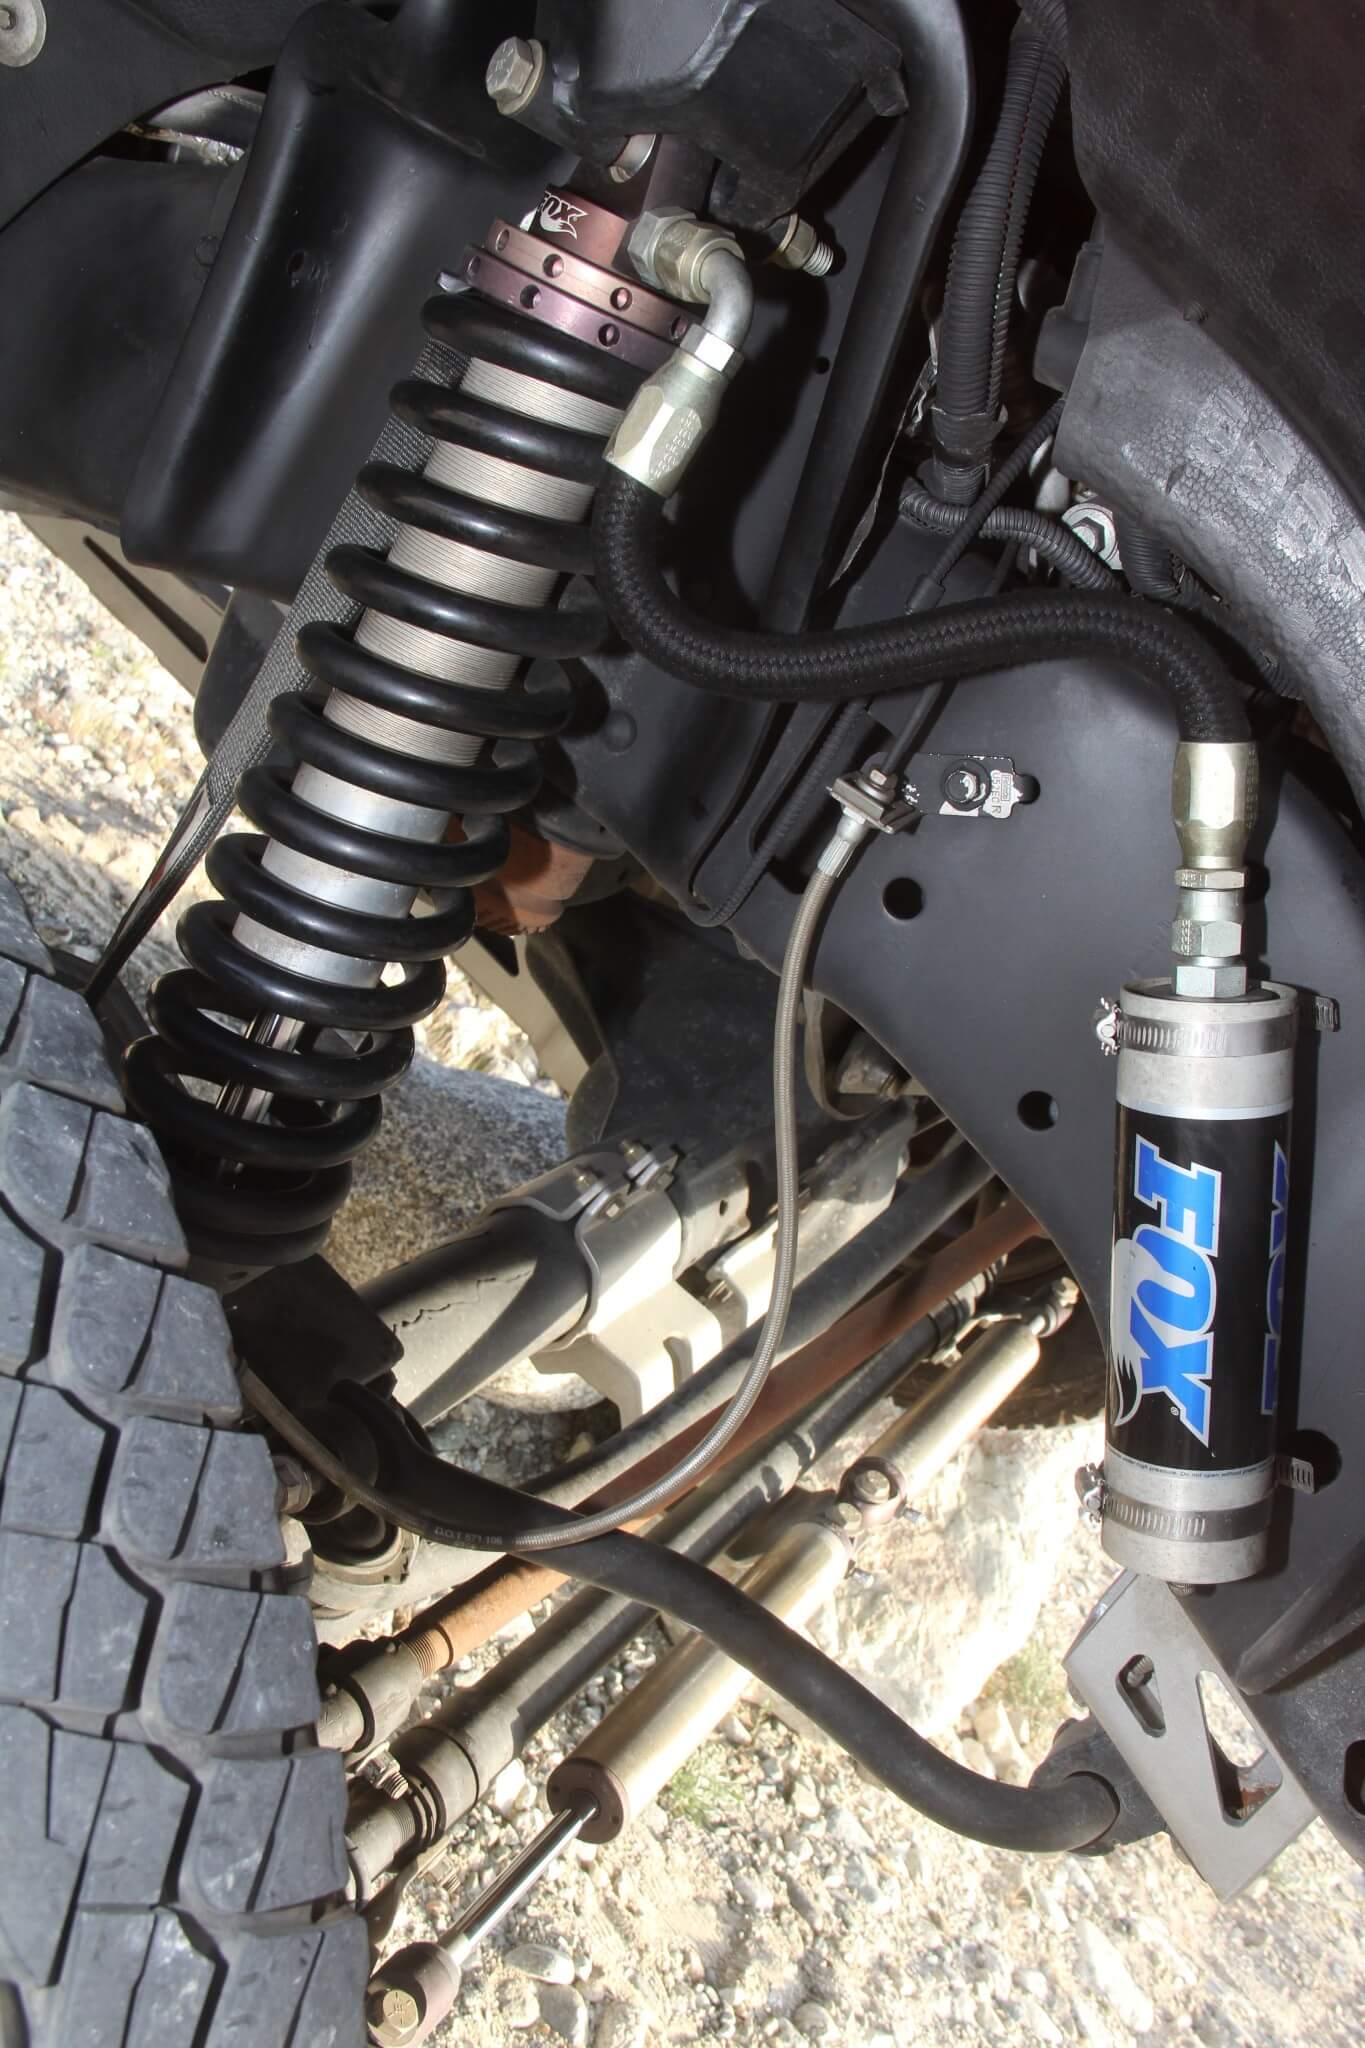 The Fox coil-over remote-reservoir shocks support and dampen the front suspension.